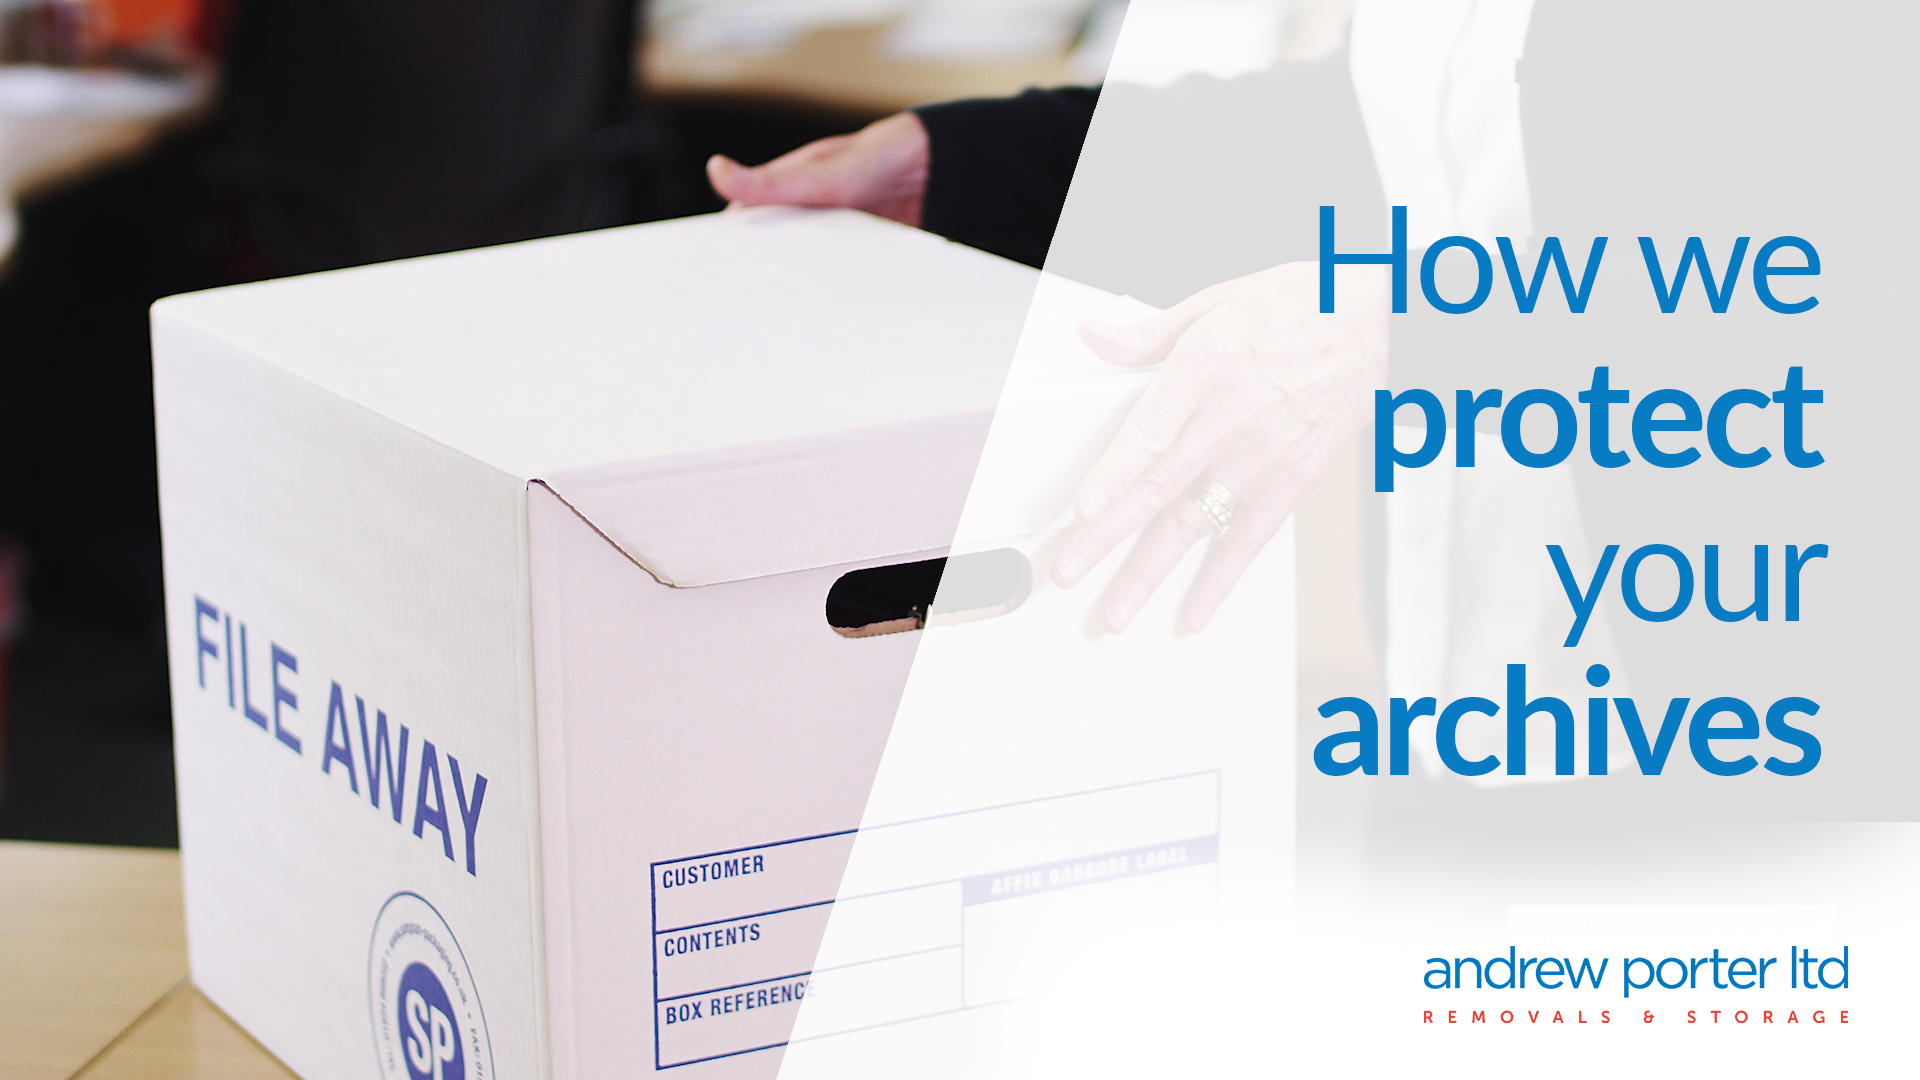 Storing your business archives securely